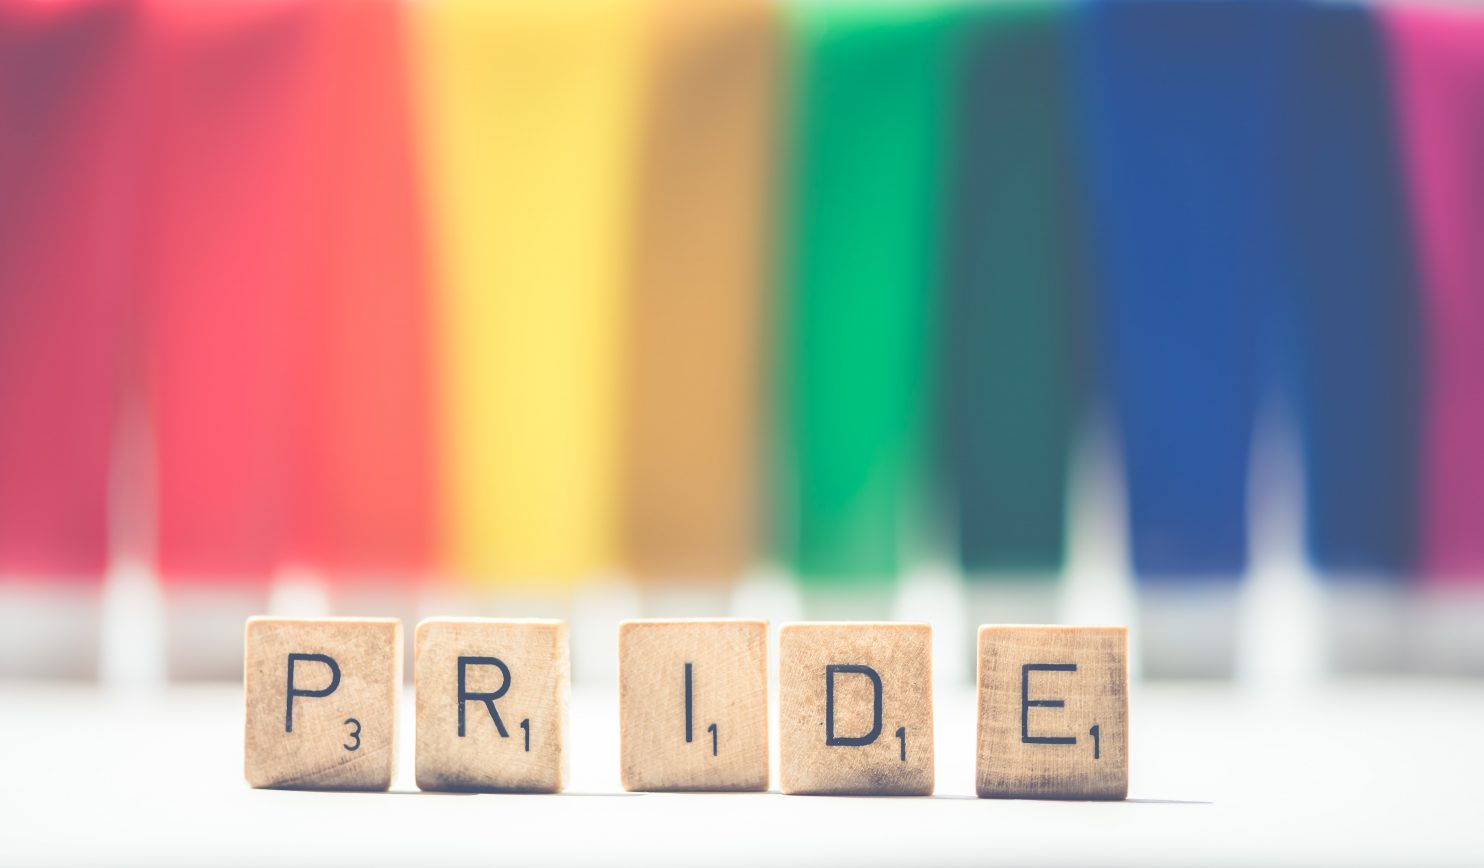 Scrabble tiles that spell out 'Pride' stand in front of a rainbow backdrop